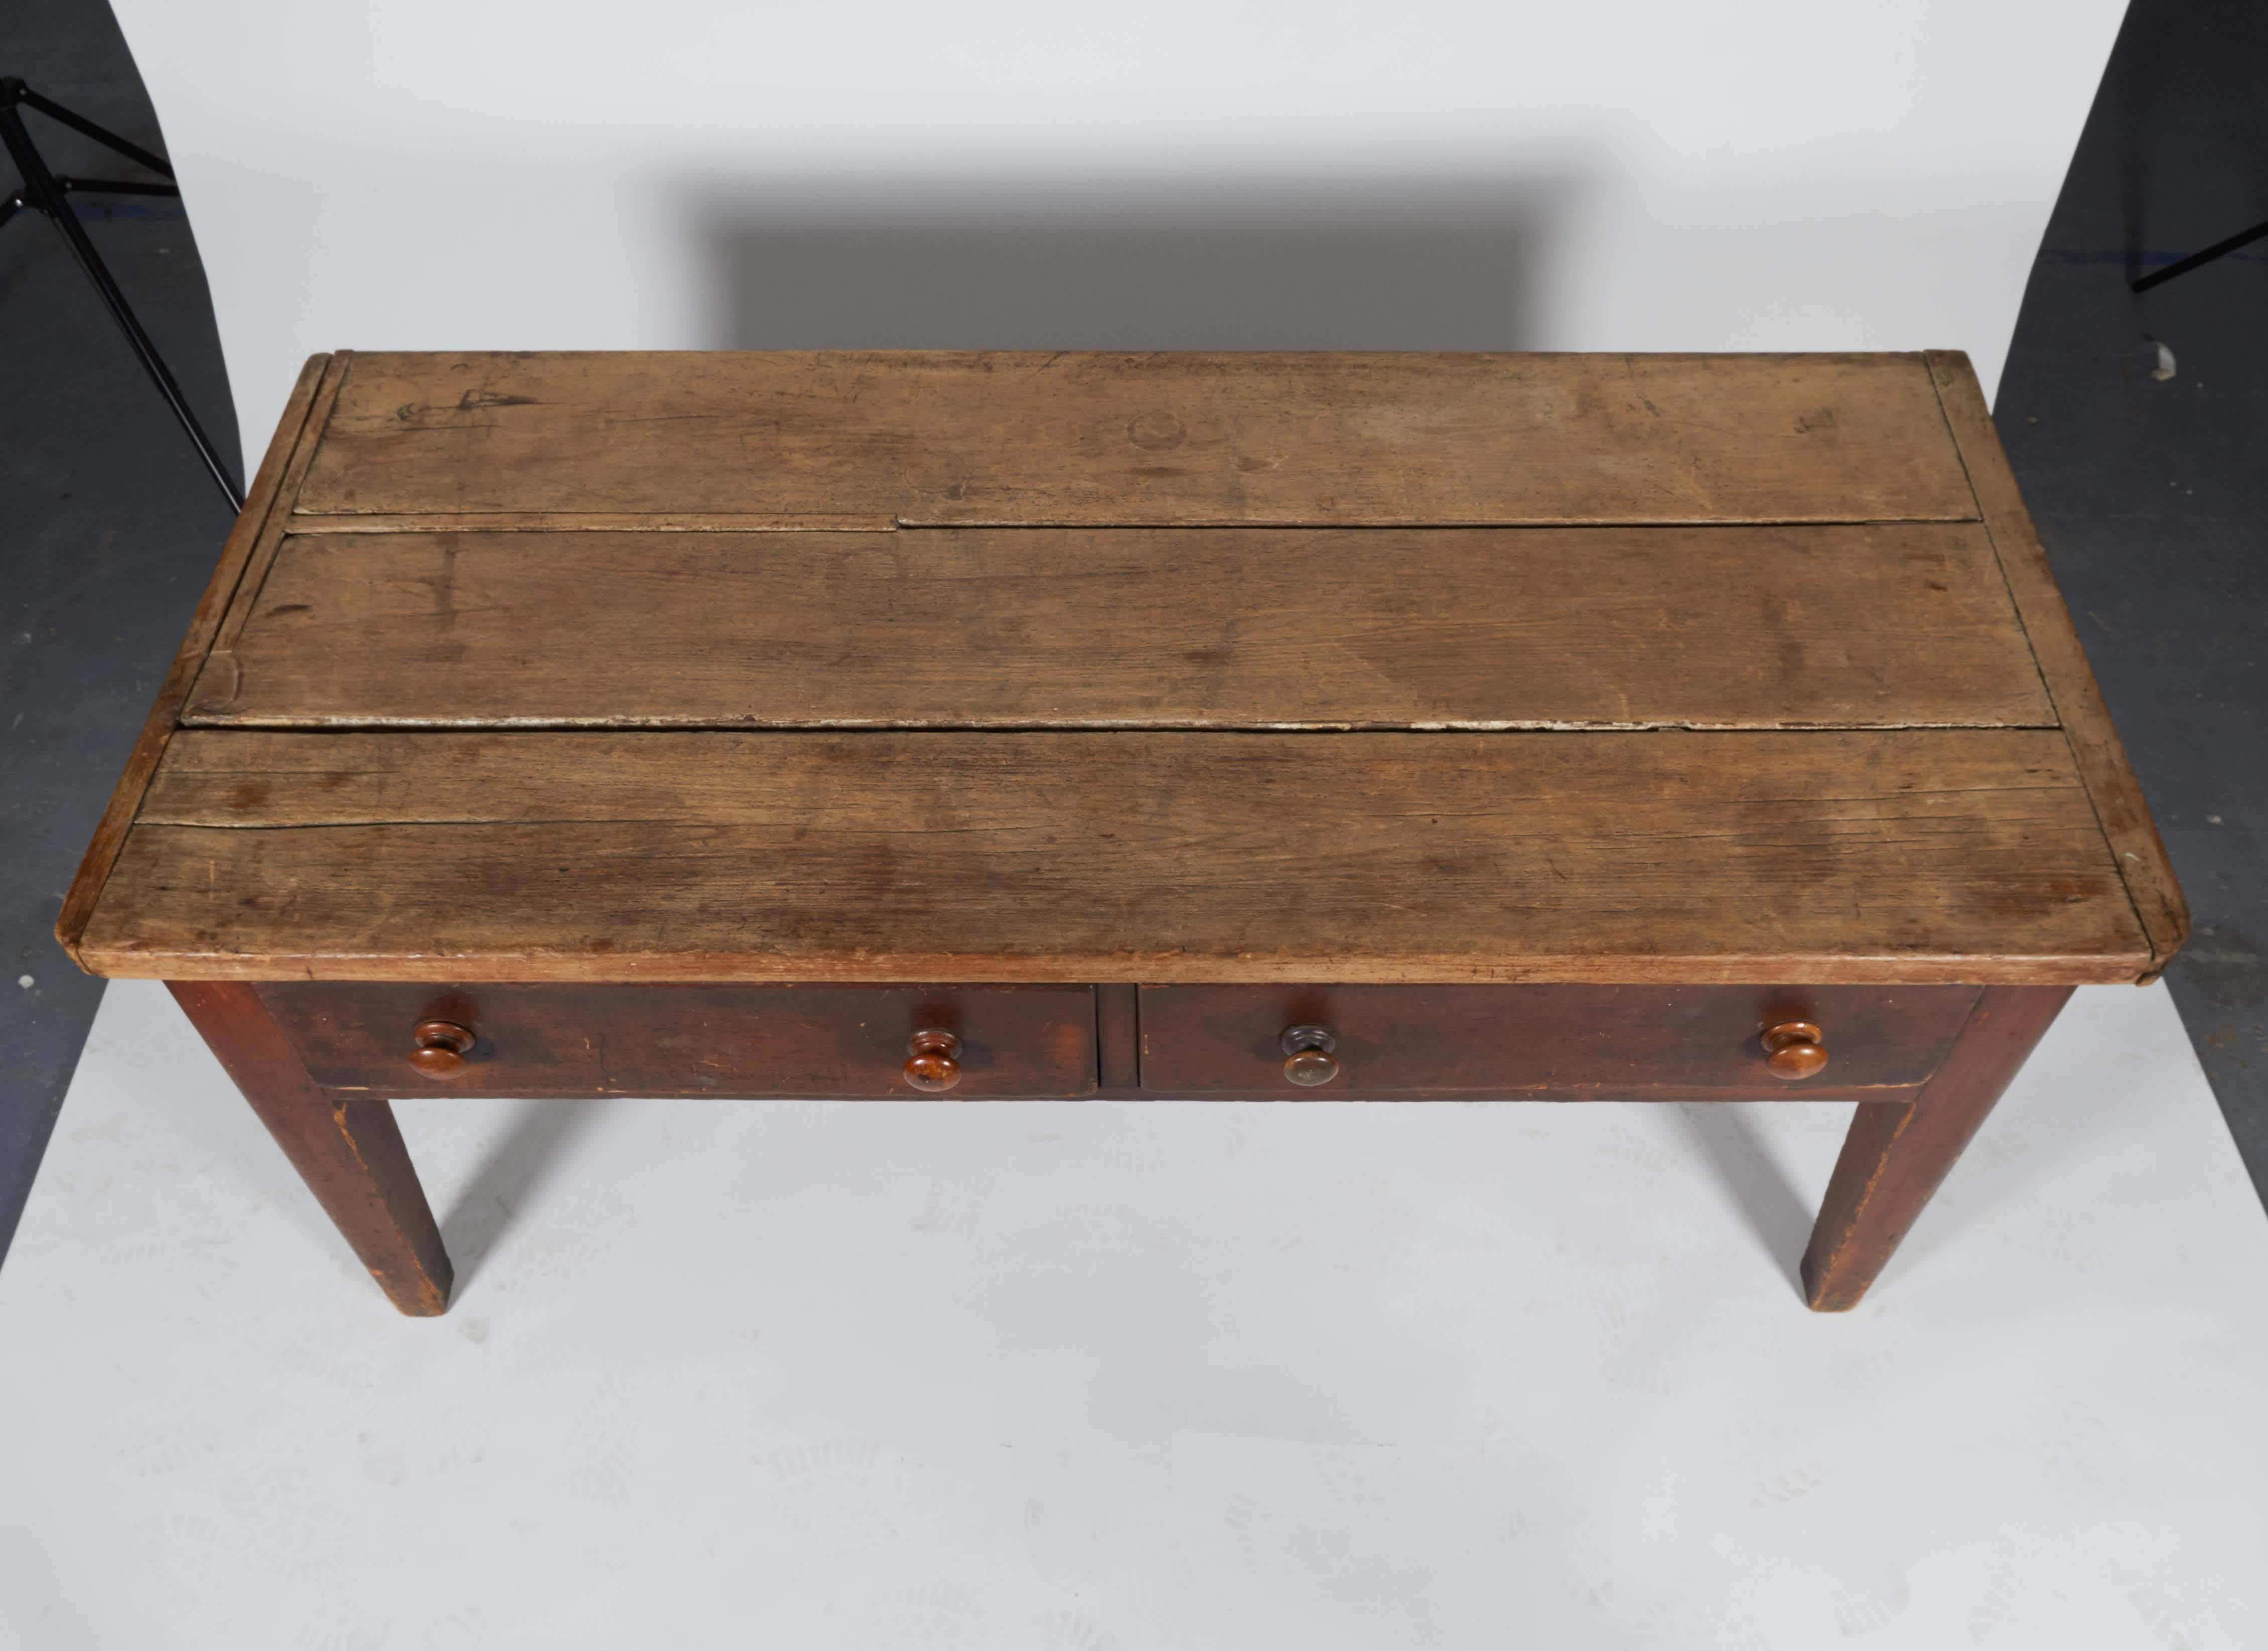 Distressed wood table with two drawers. 

Not available for sale or to ship in the state of California.